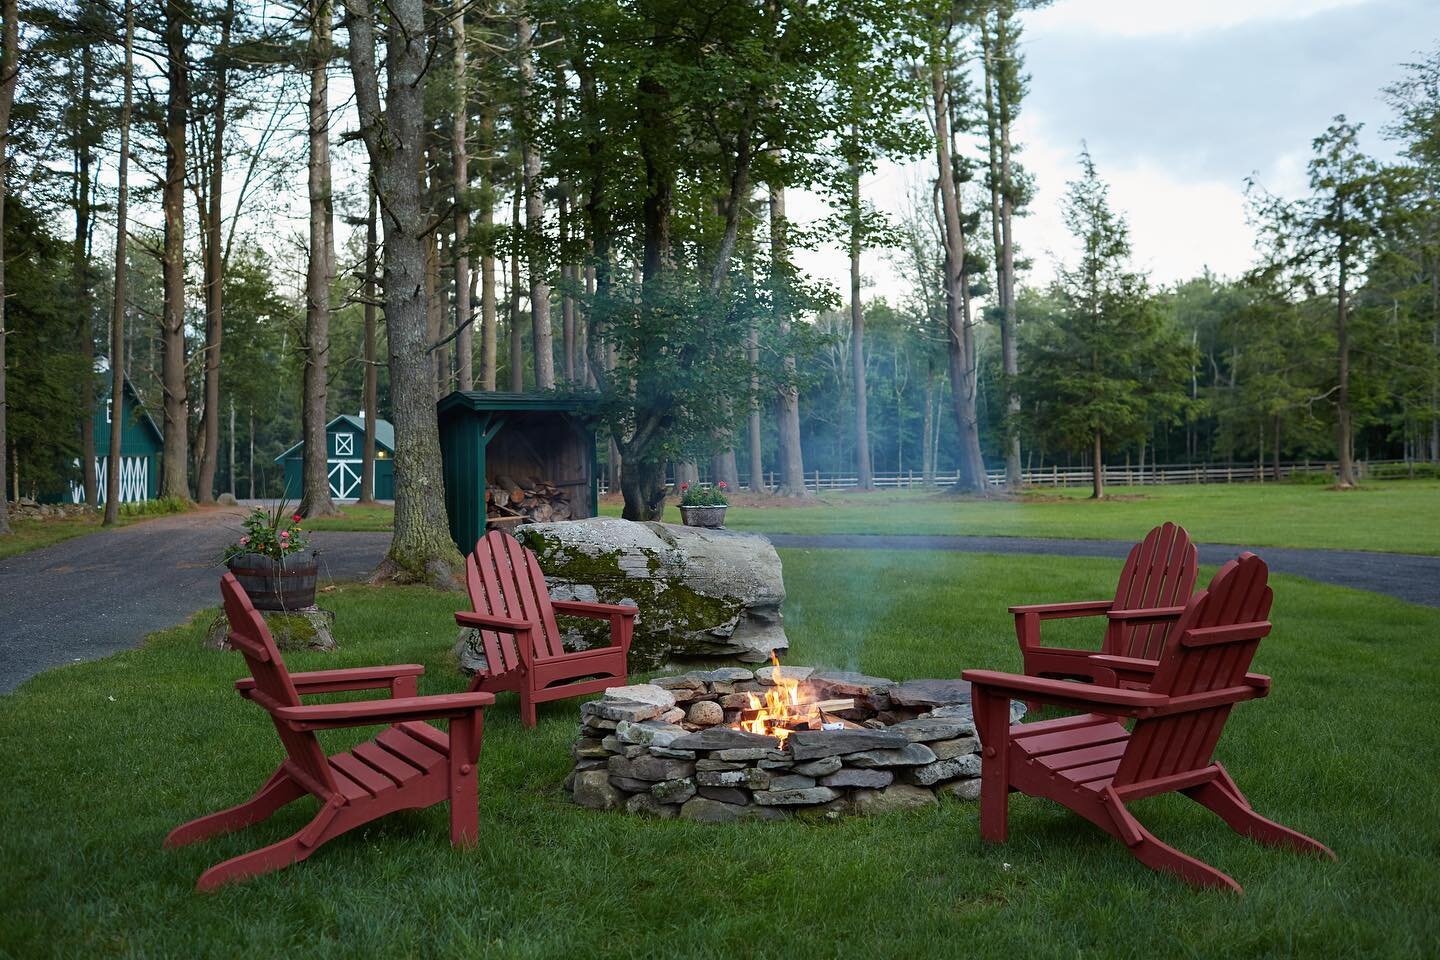 What are your weekend plans? This is the perfect spot to kick back and relax with friends and family. 
&bull;
&bull;
&bull;
#relax #realestate #upstateliving #livmanor #catskillmountains #sullivancatskills #forsale #luxuryhomes #thehartranch #cedward